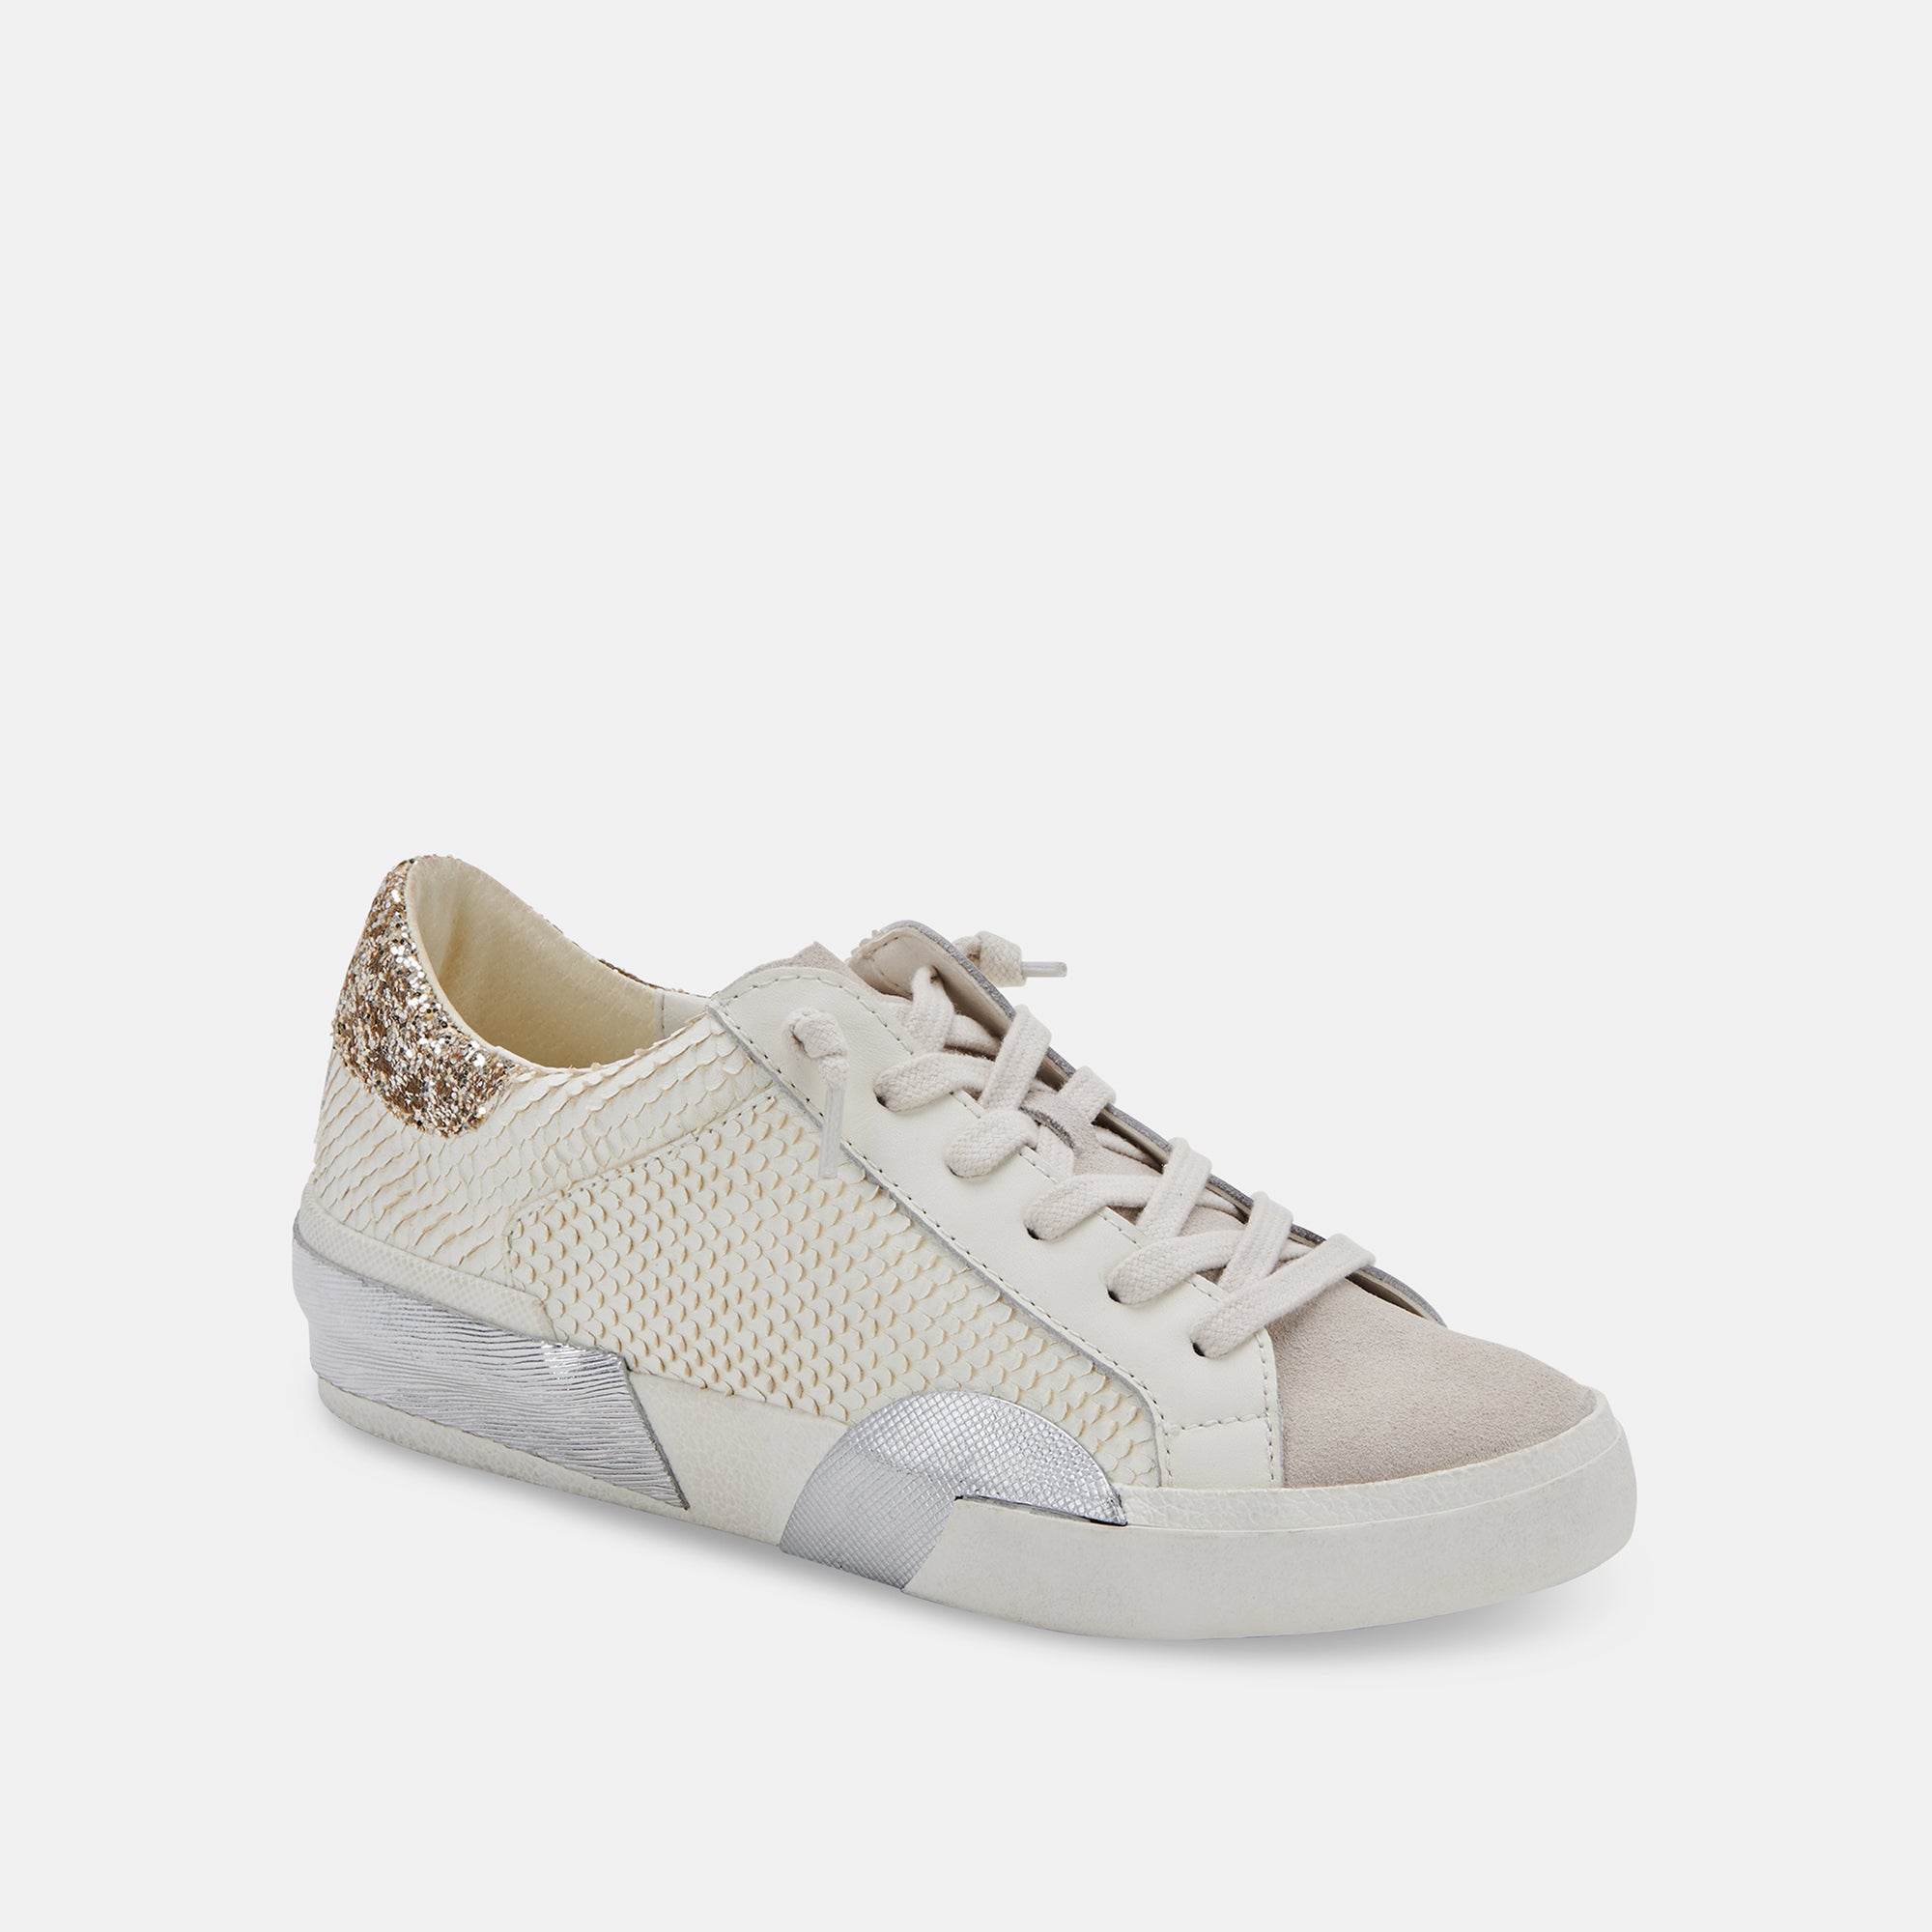 ZINA SNEAKERS OFF WHITE EMBOSSED LEATHER – Dolce Vita